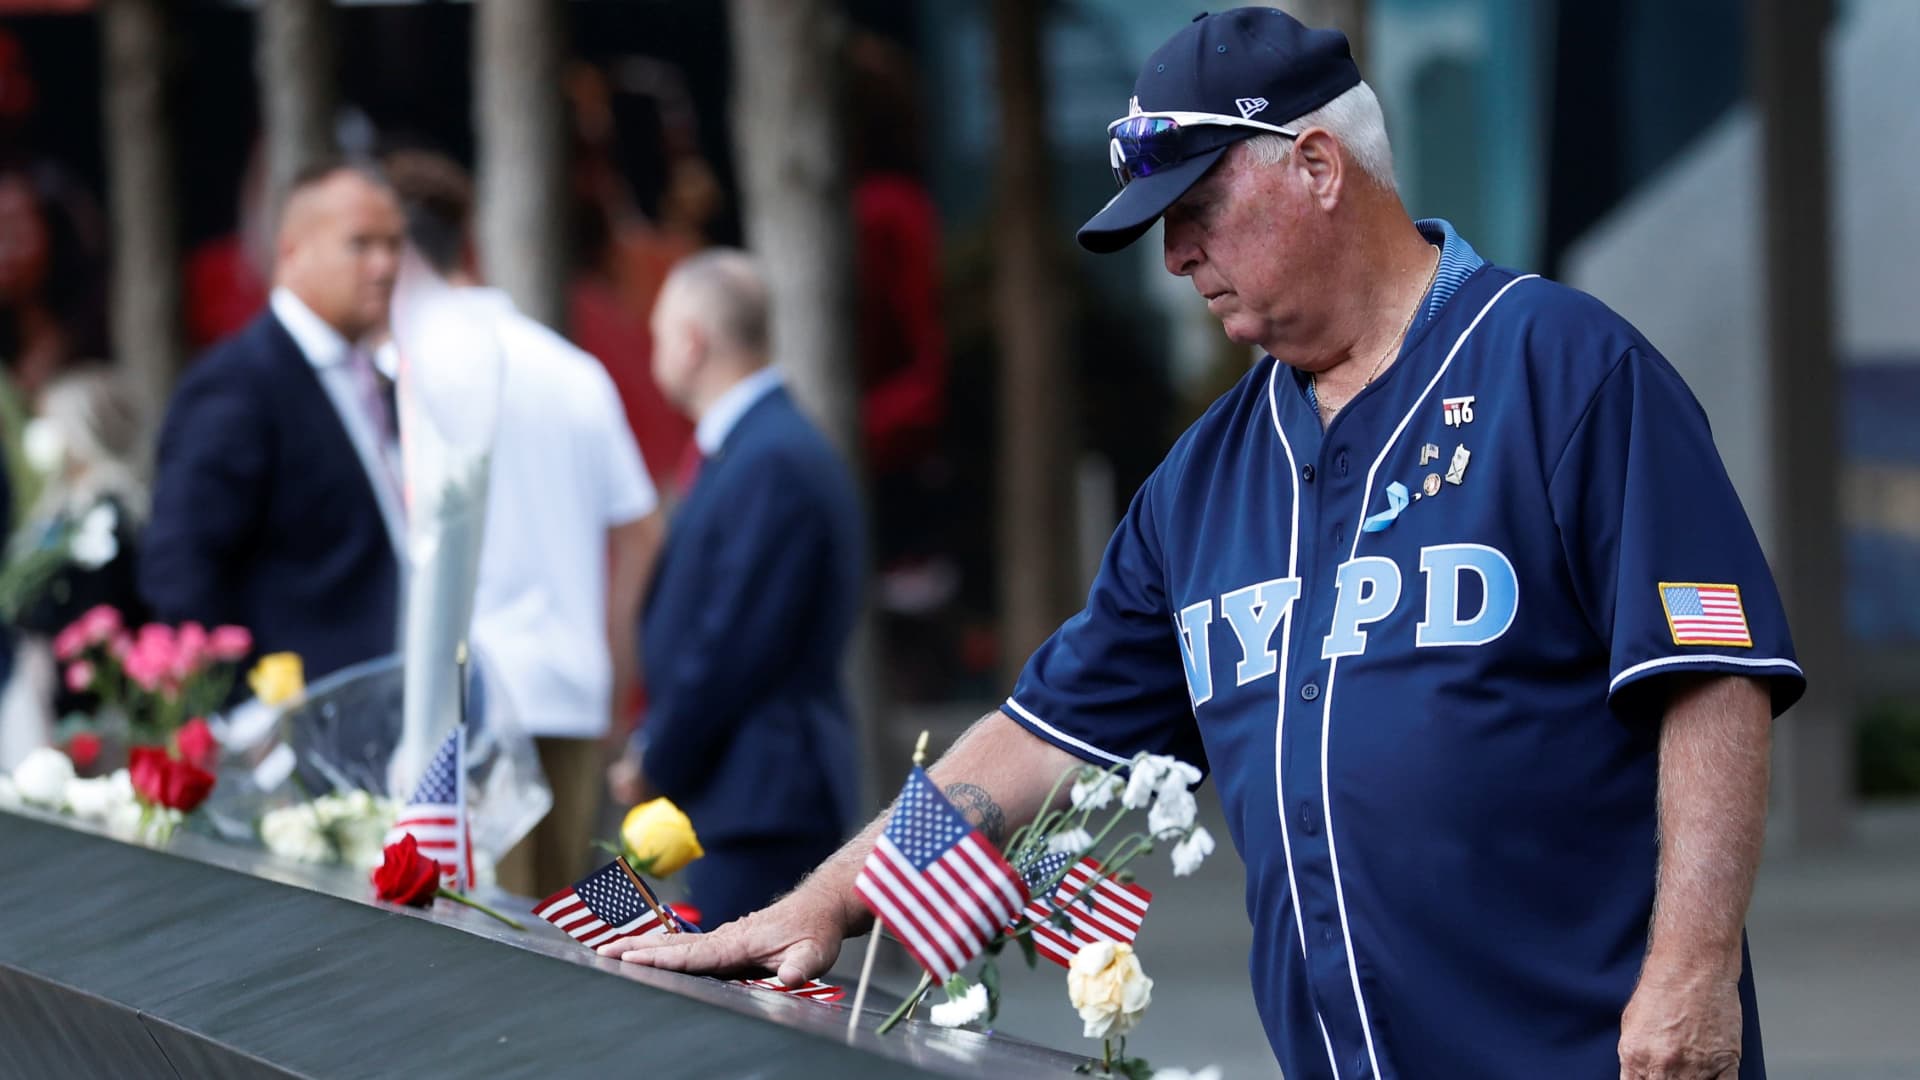 A man mourns at the 9/11 Memorial on the 20th anniversary of the September 11 attacks in Manhattan, New York City, U.S., September 11, 2021.